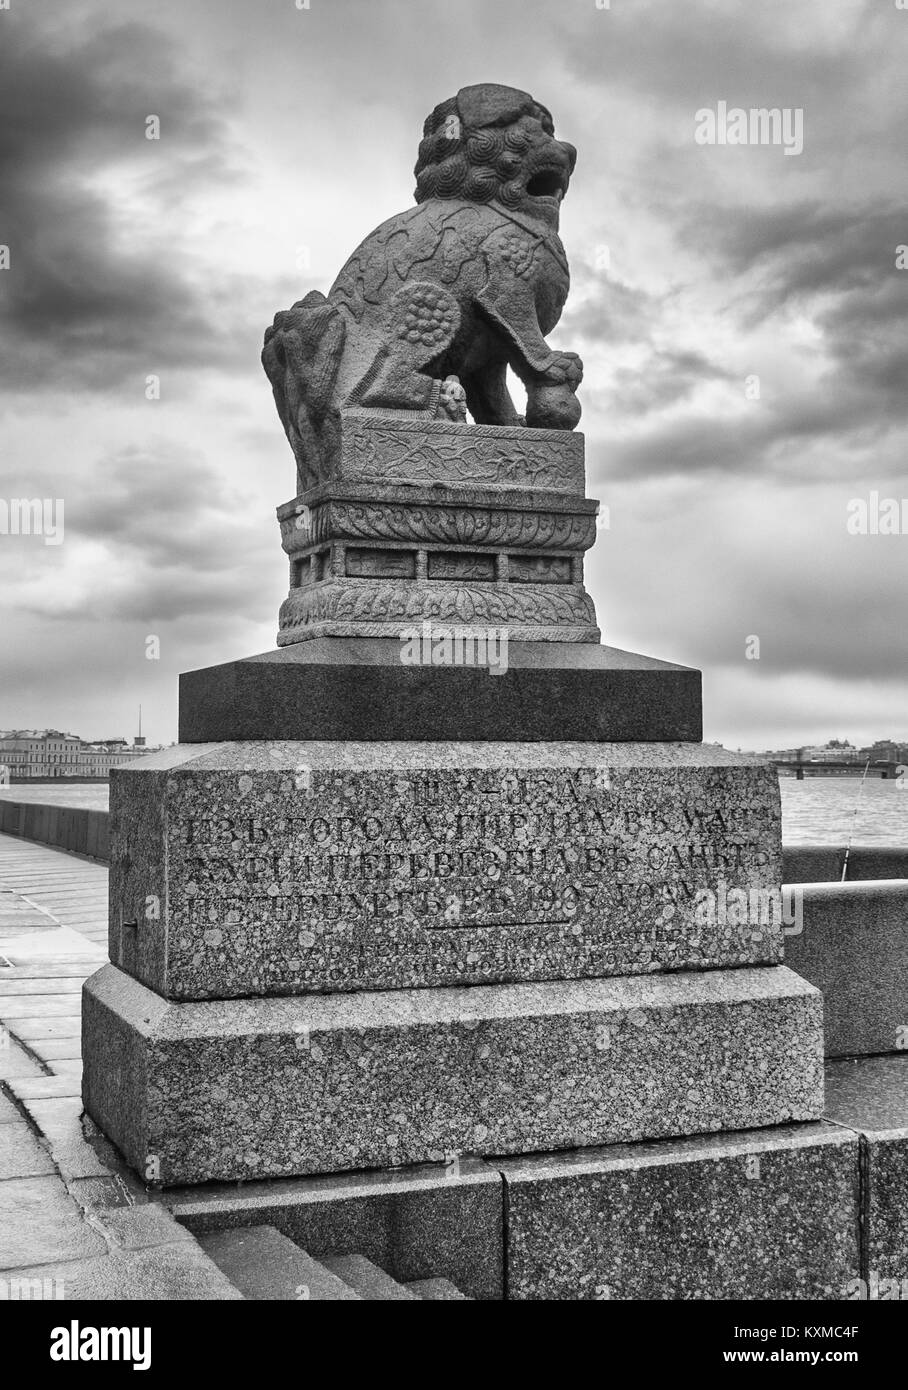 Sculpture of the Chinese lion Shih Tzu brought from the Chinese city of Girin on the Petrovskaya embankment near the Neva River against the backdrop o Stock Photo